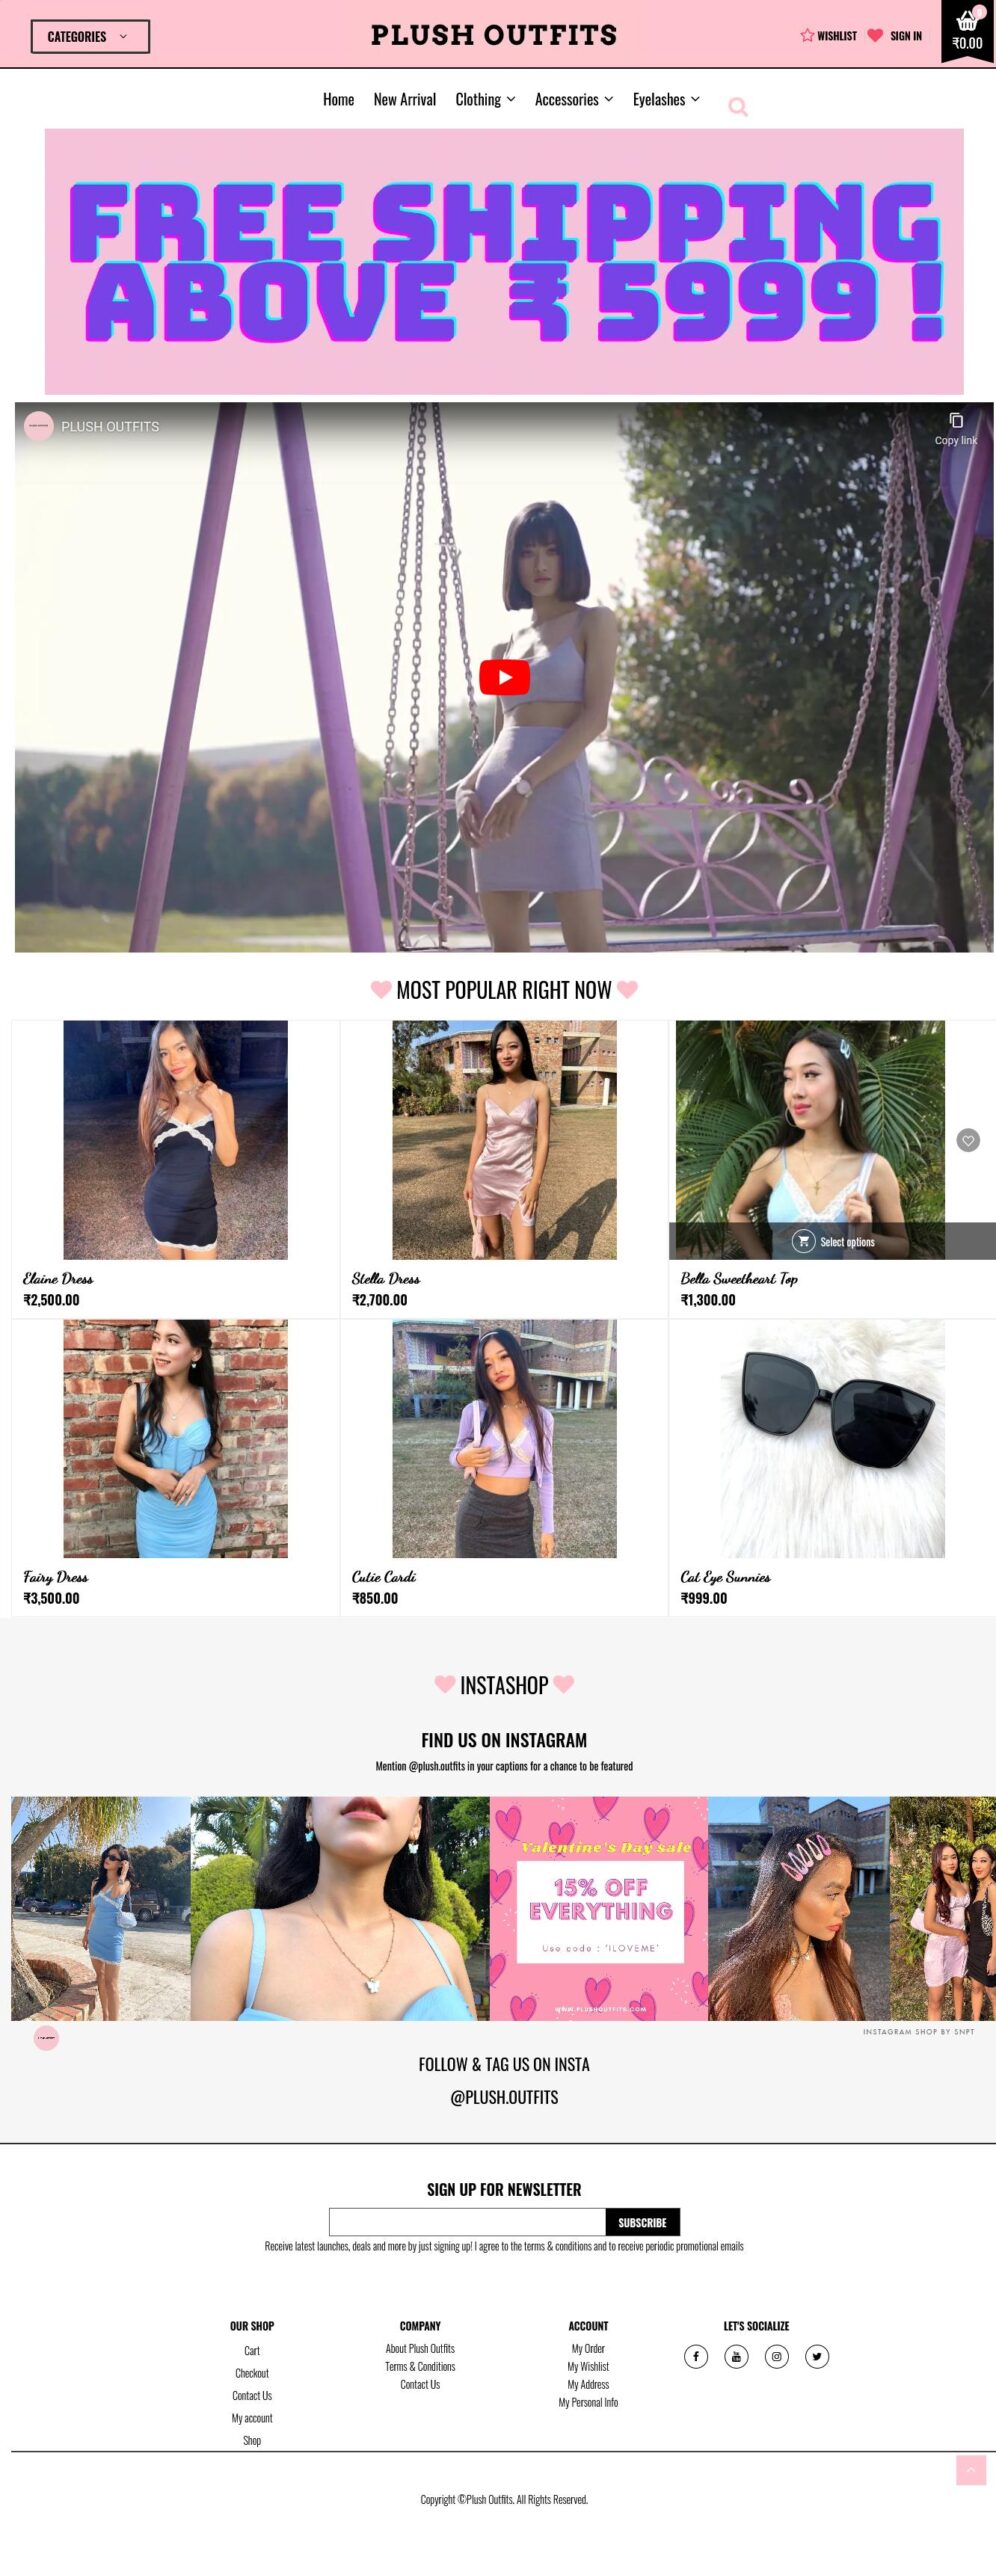 Plush Outfits Online apparel store